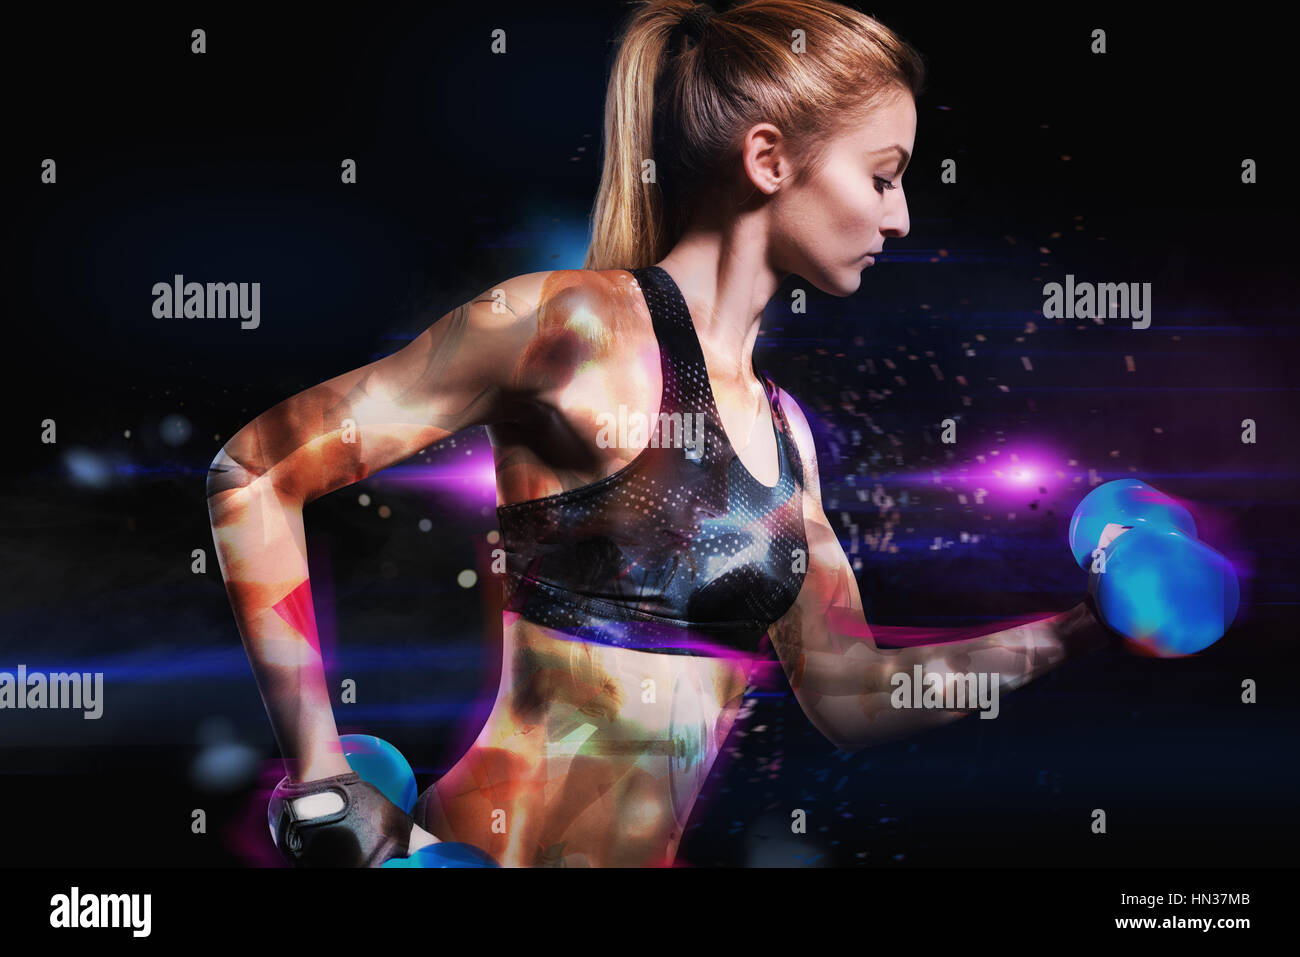 Galactic power workout Stock Photo